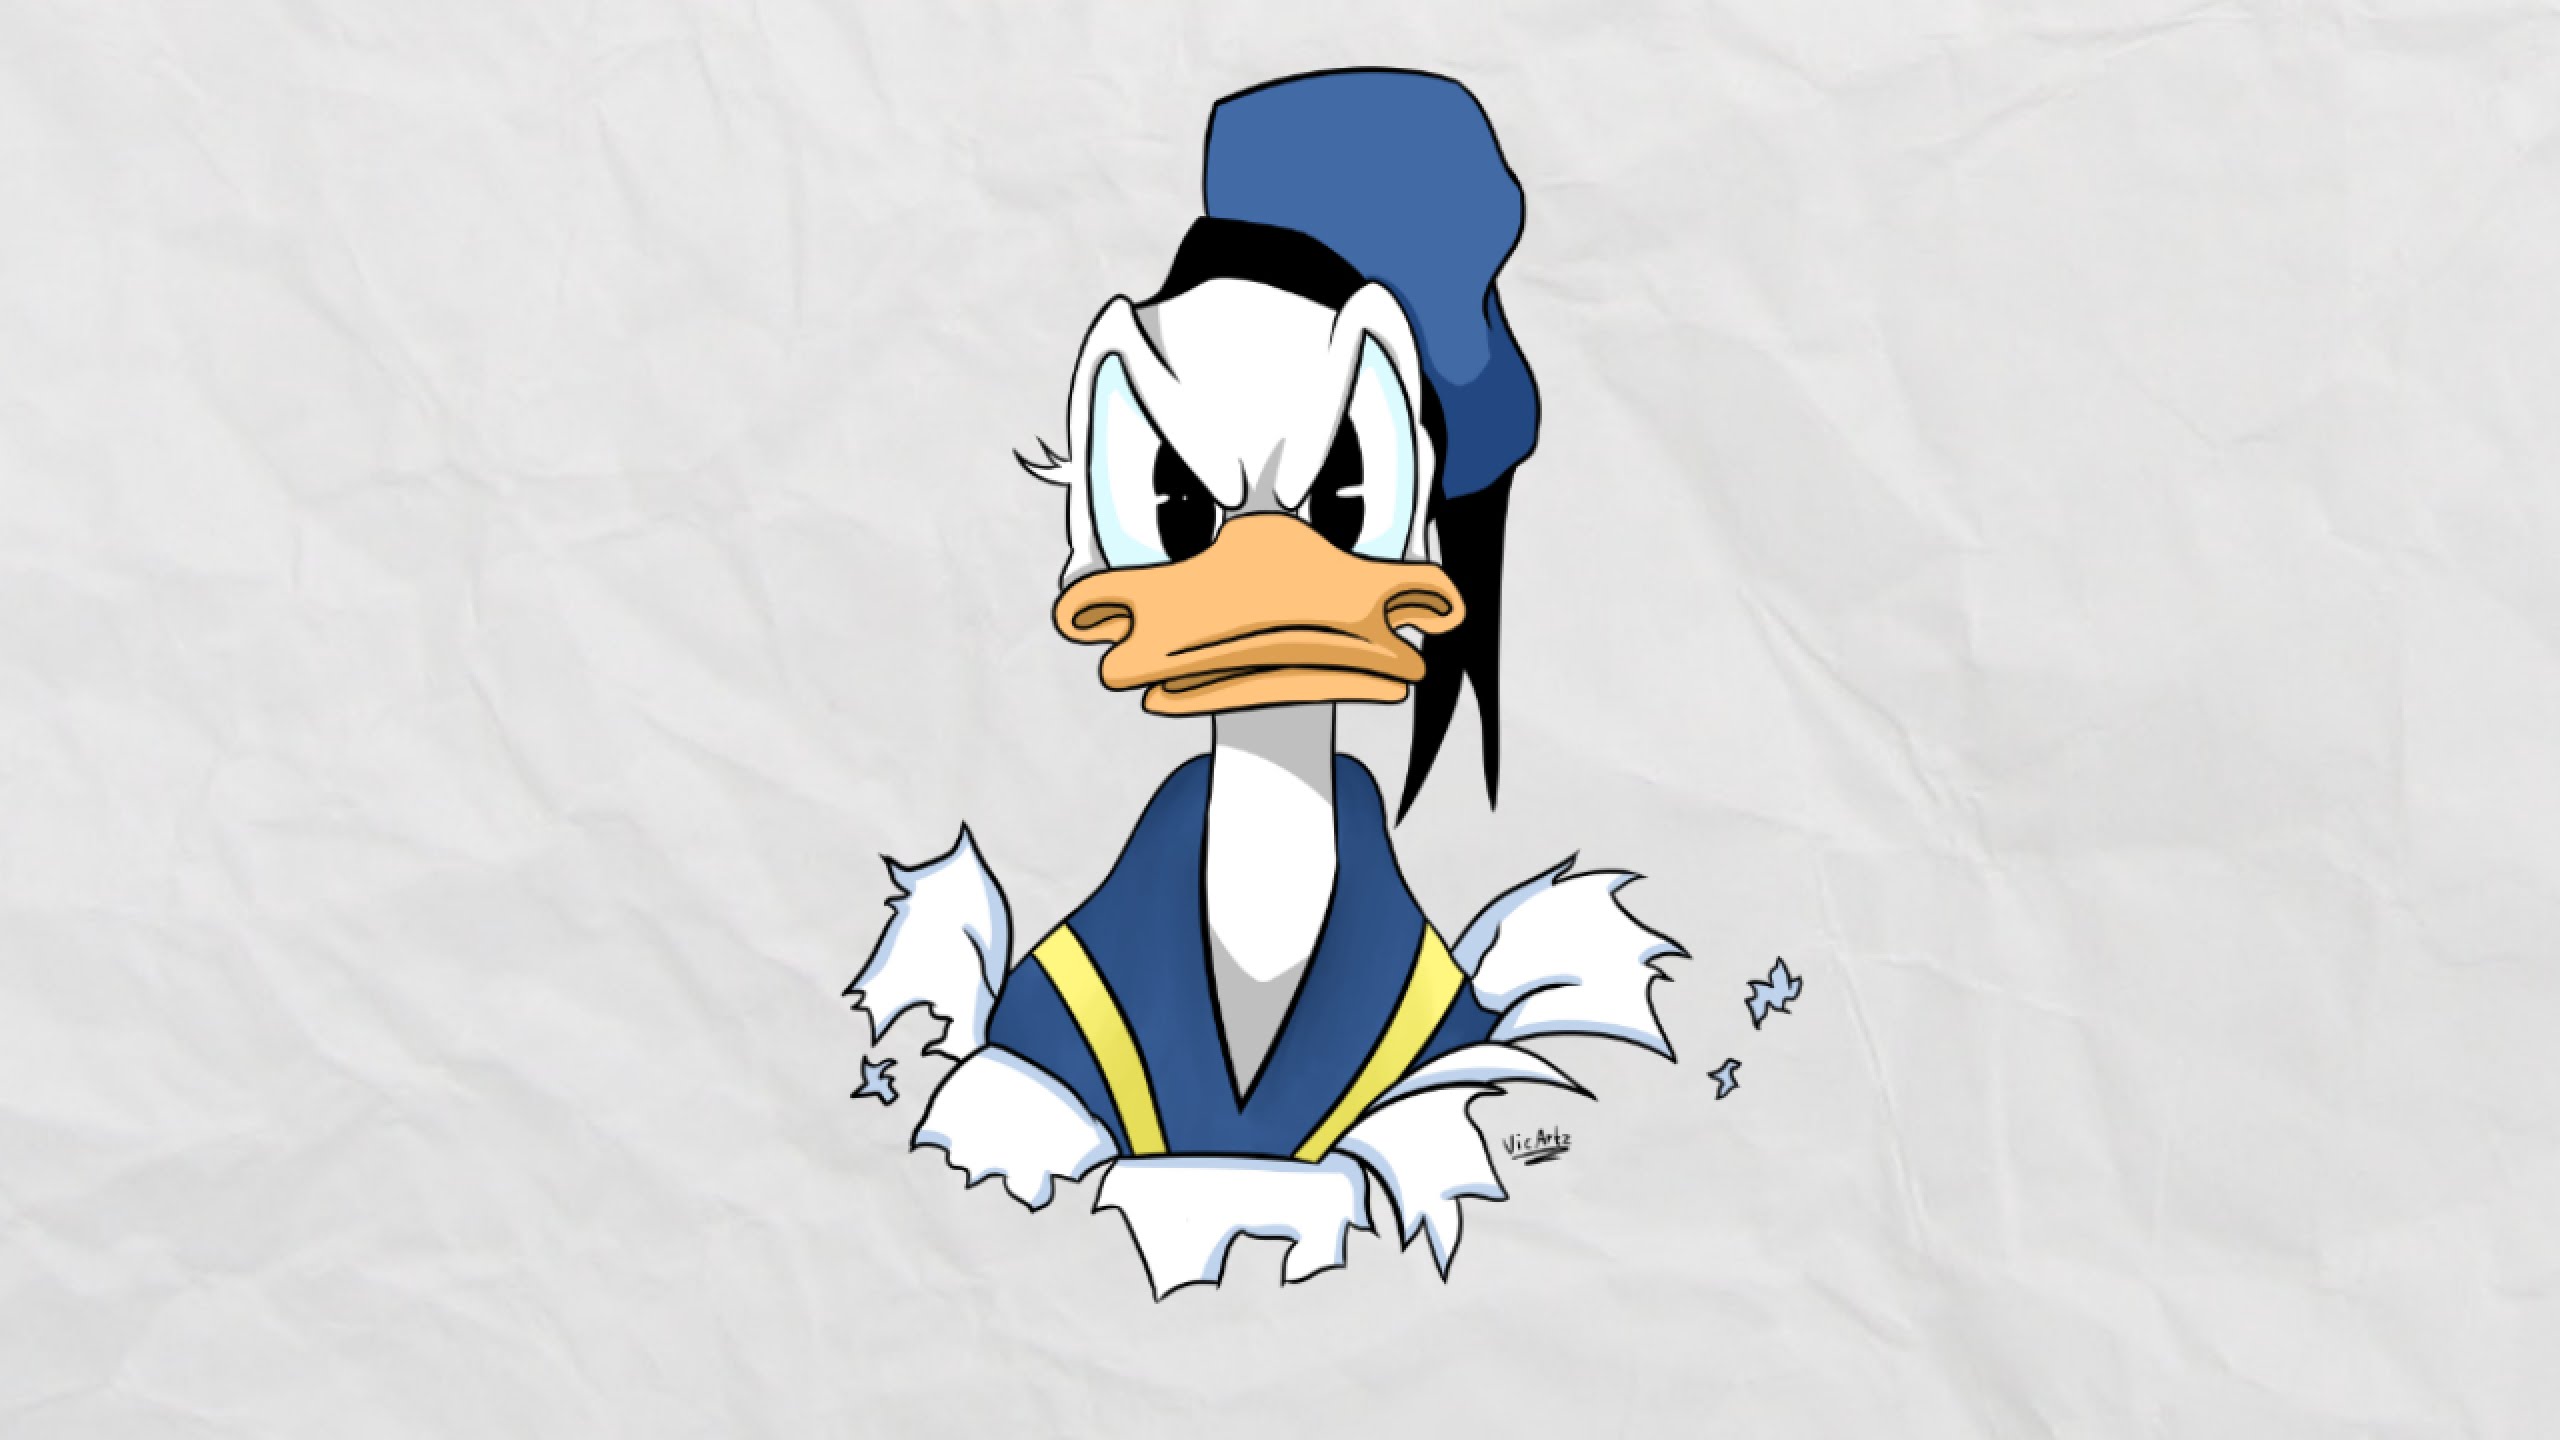 Donald Duck in a blue hat and suit - Duck